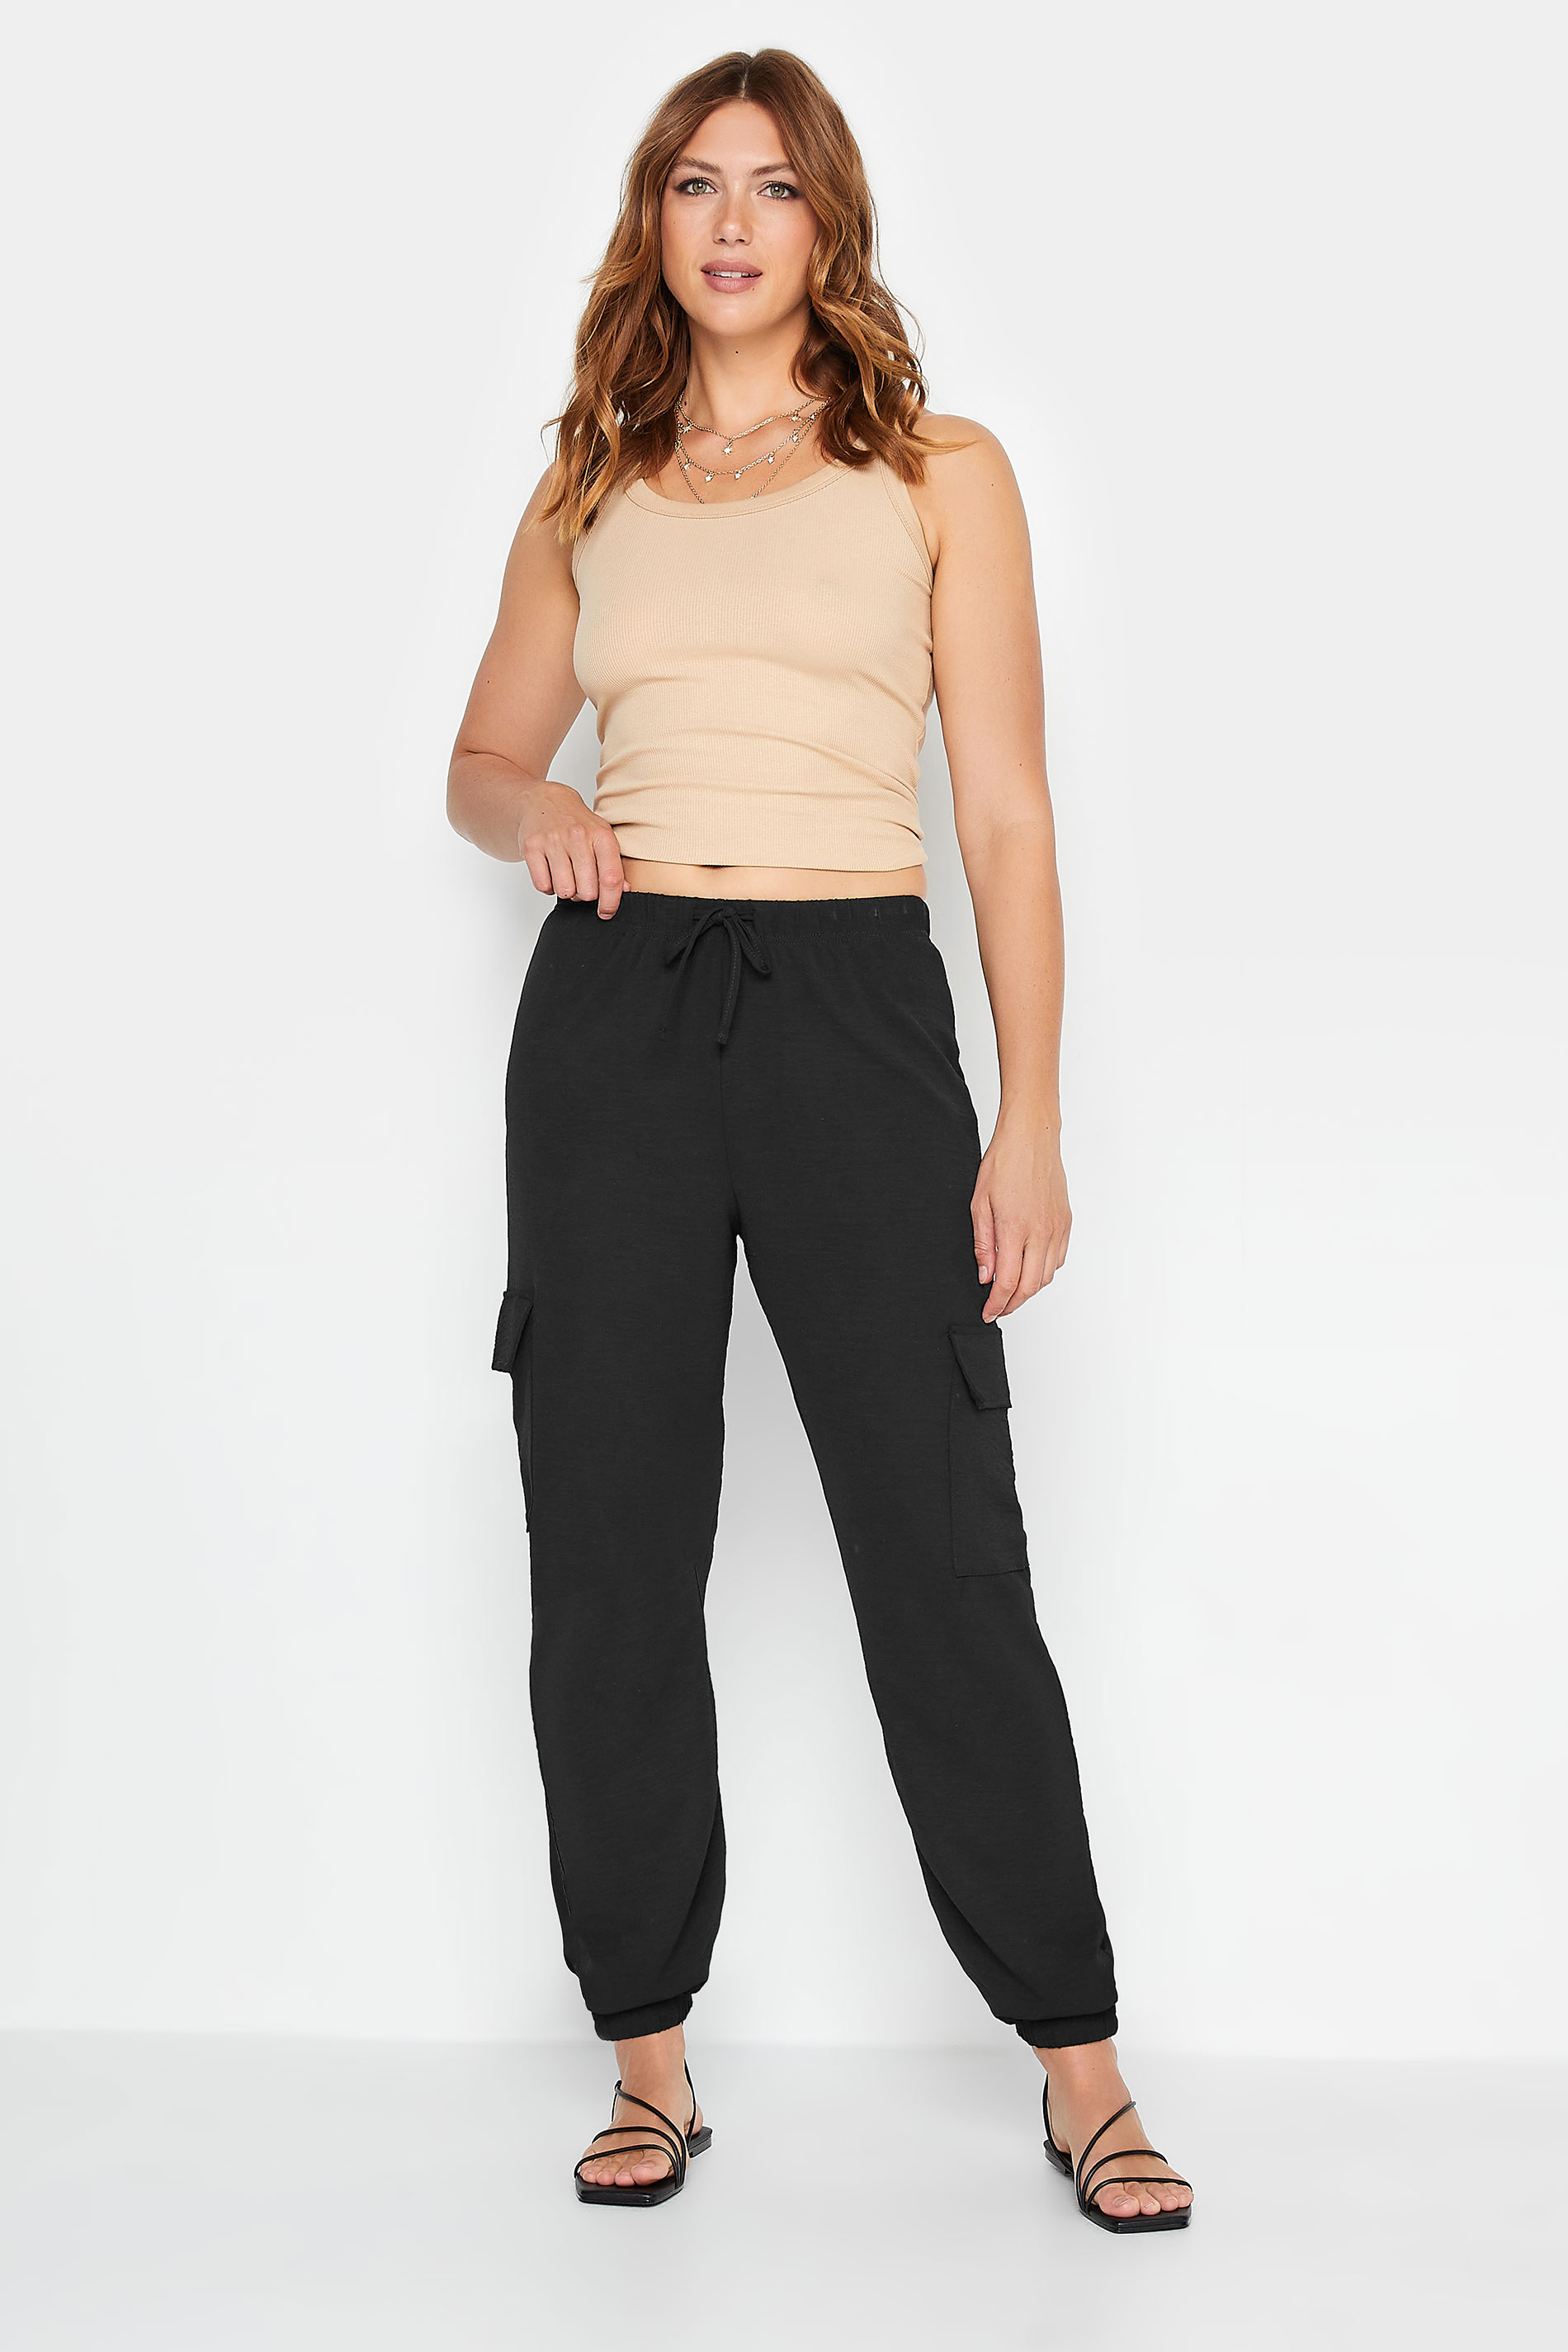 Cargo Trousers Women's Black High Waist Lightweight Trousers Casual Trousers  Training Trousers Women with Drawstring and Pockets Girls Running Trousers  Fabric Trousers Loose Casual Plus Size Teenager : Amazon.co.uk: Fashion